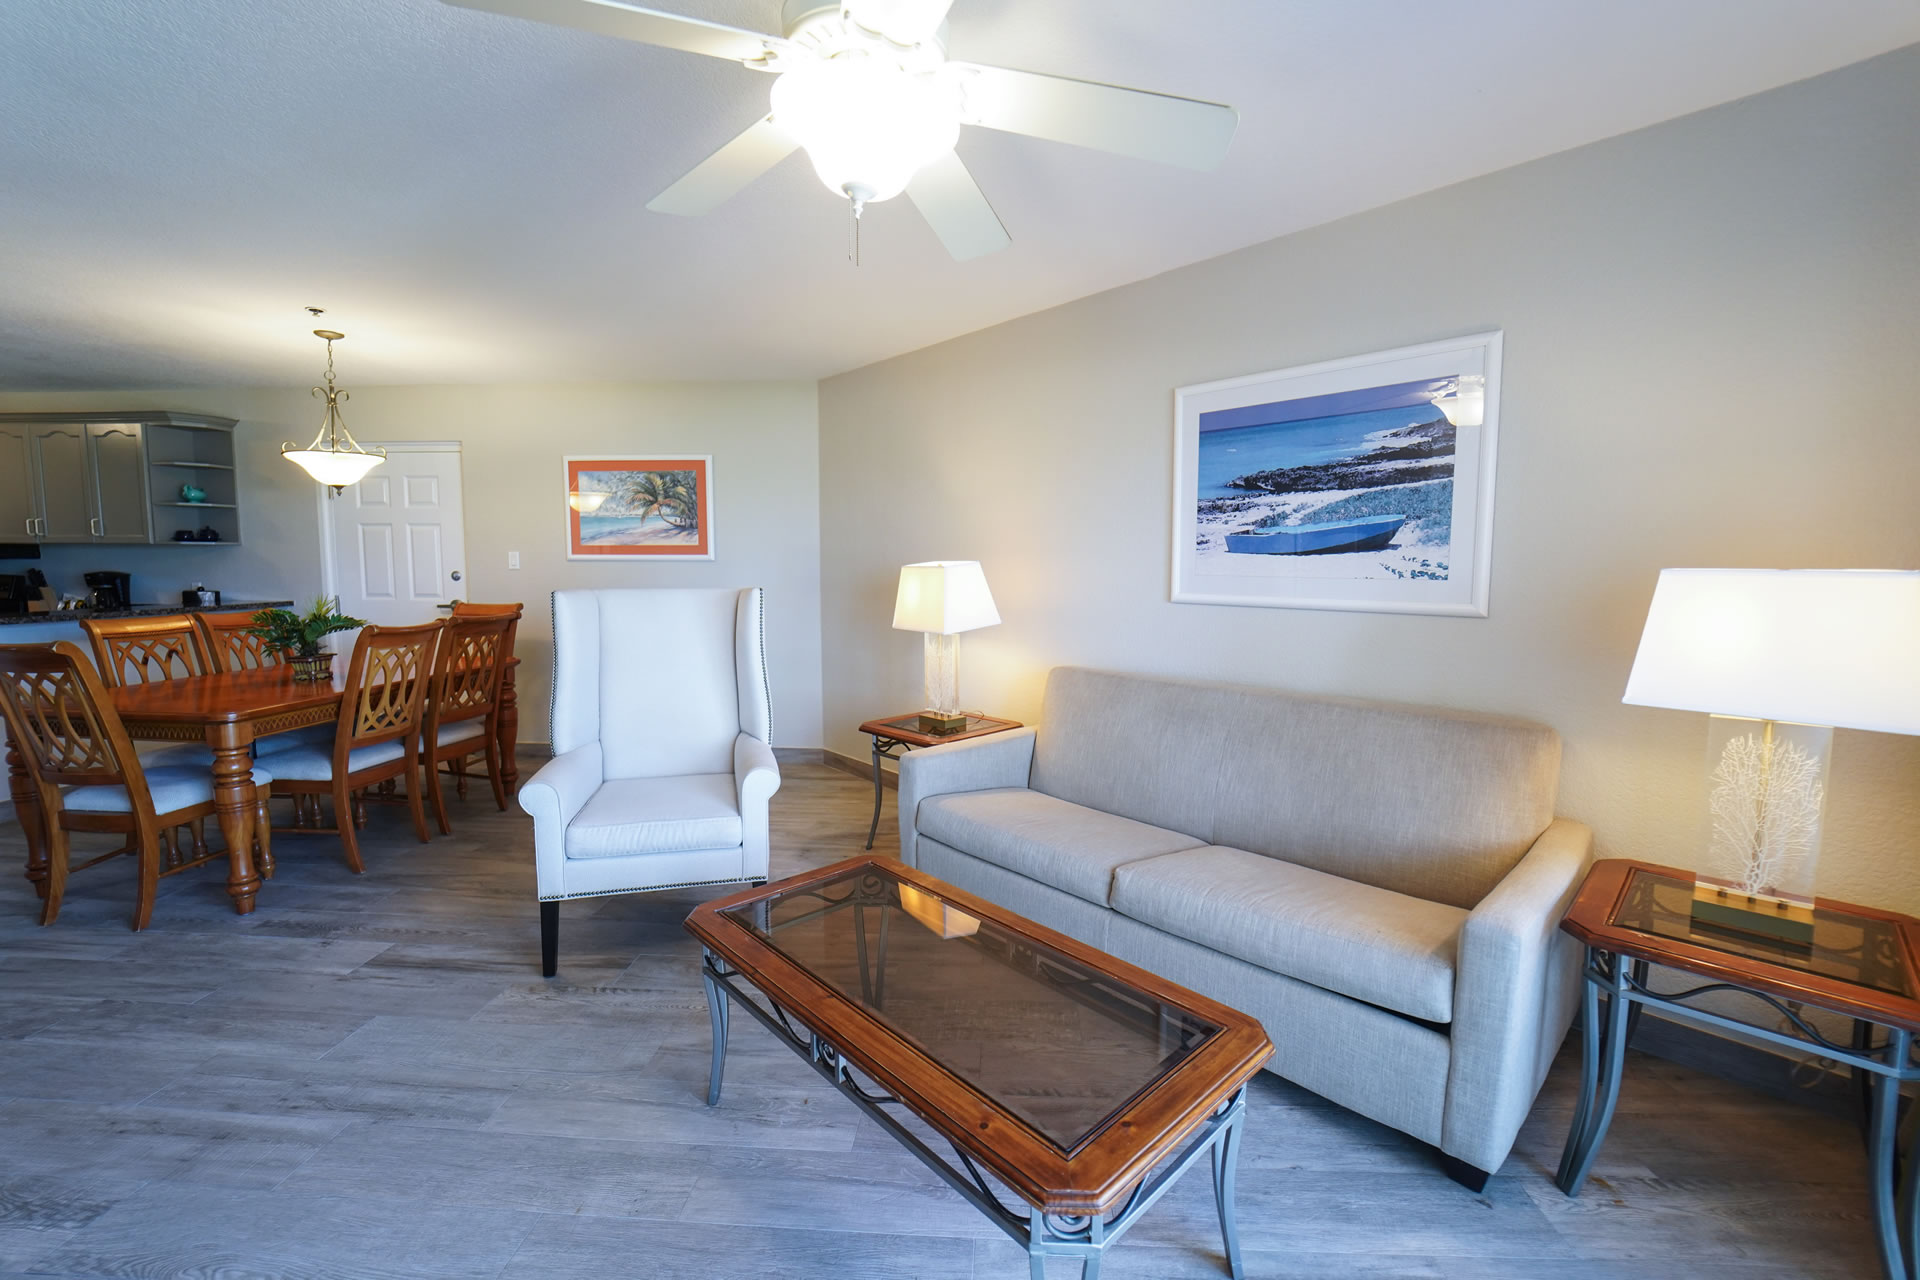 Living room and dining room table in the One Bedroom King Suite at the Grand Caymanian Resort.